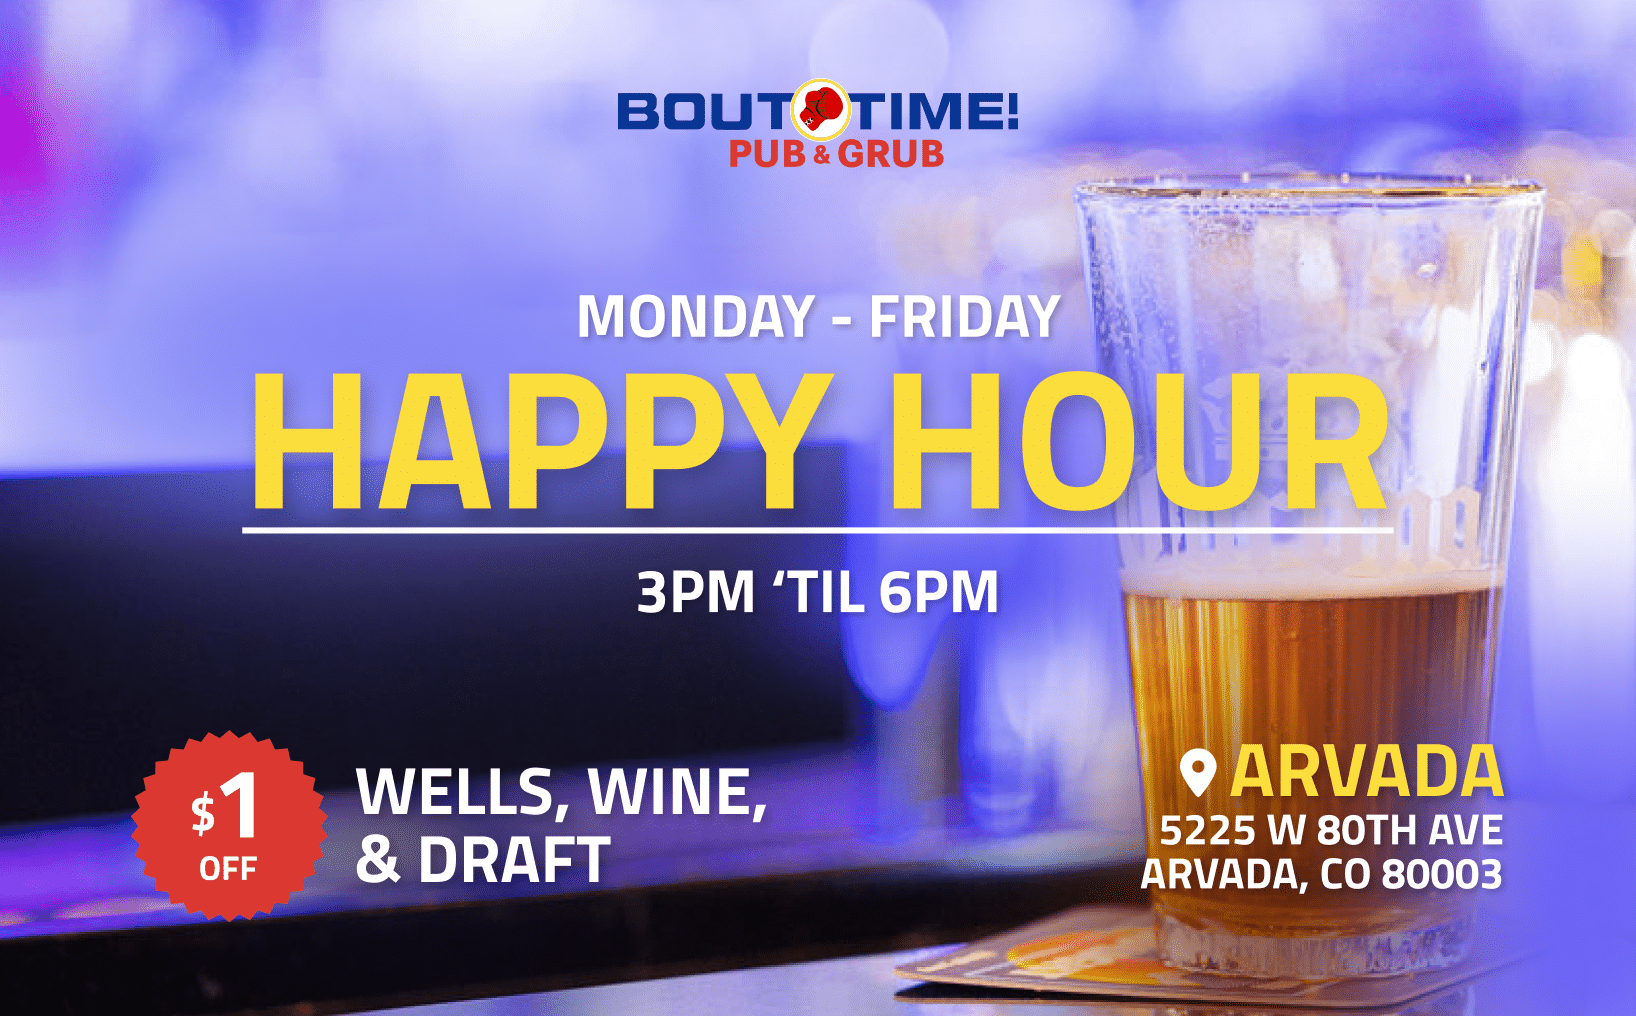 Happy Hour, Monday-Friday, 3pm to 6pm, at Arvada Colorado location of Bout Time Pub & Grill